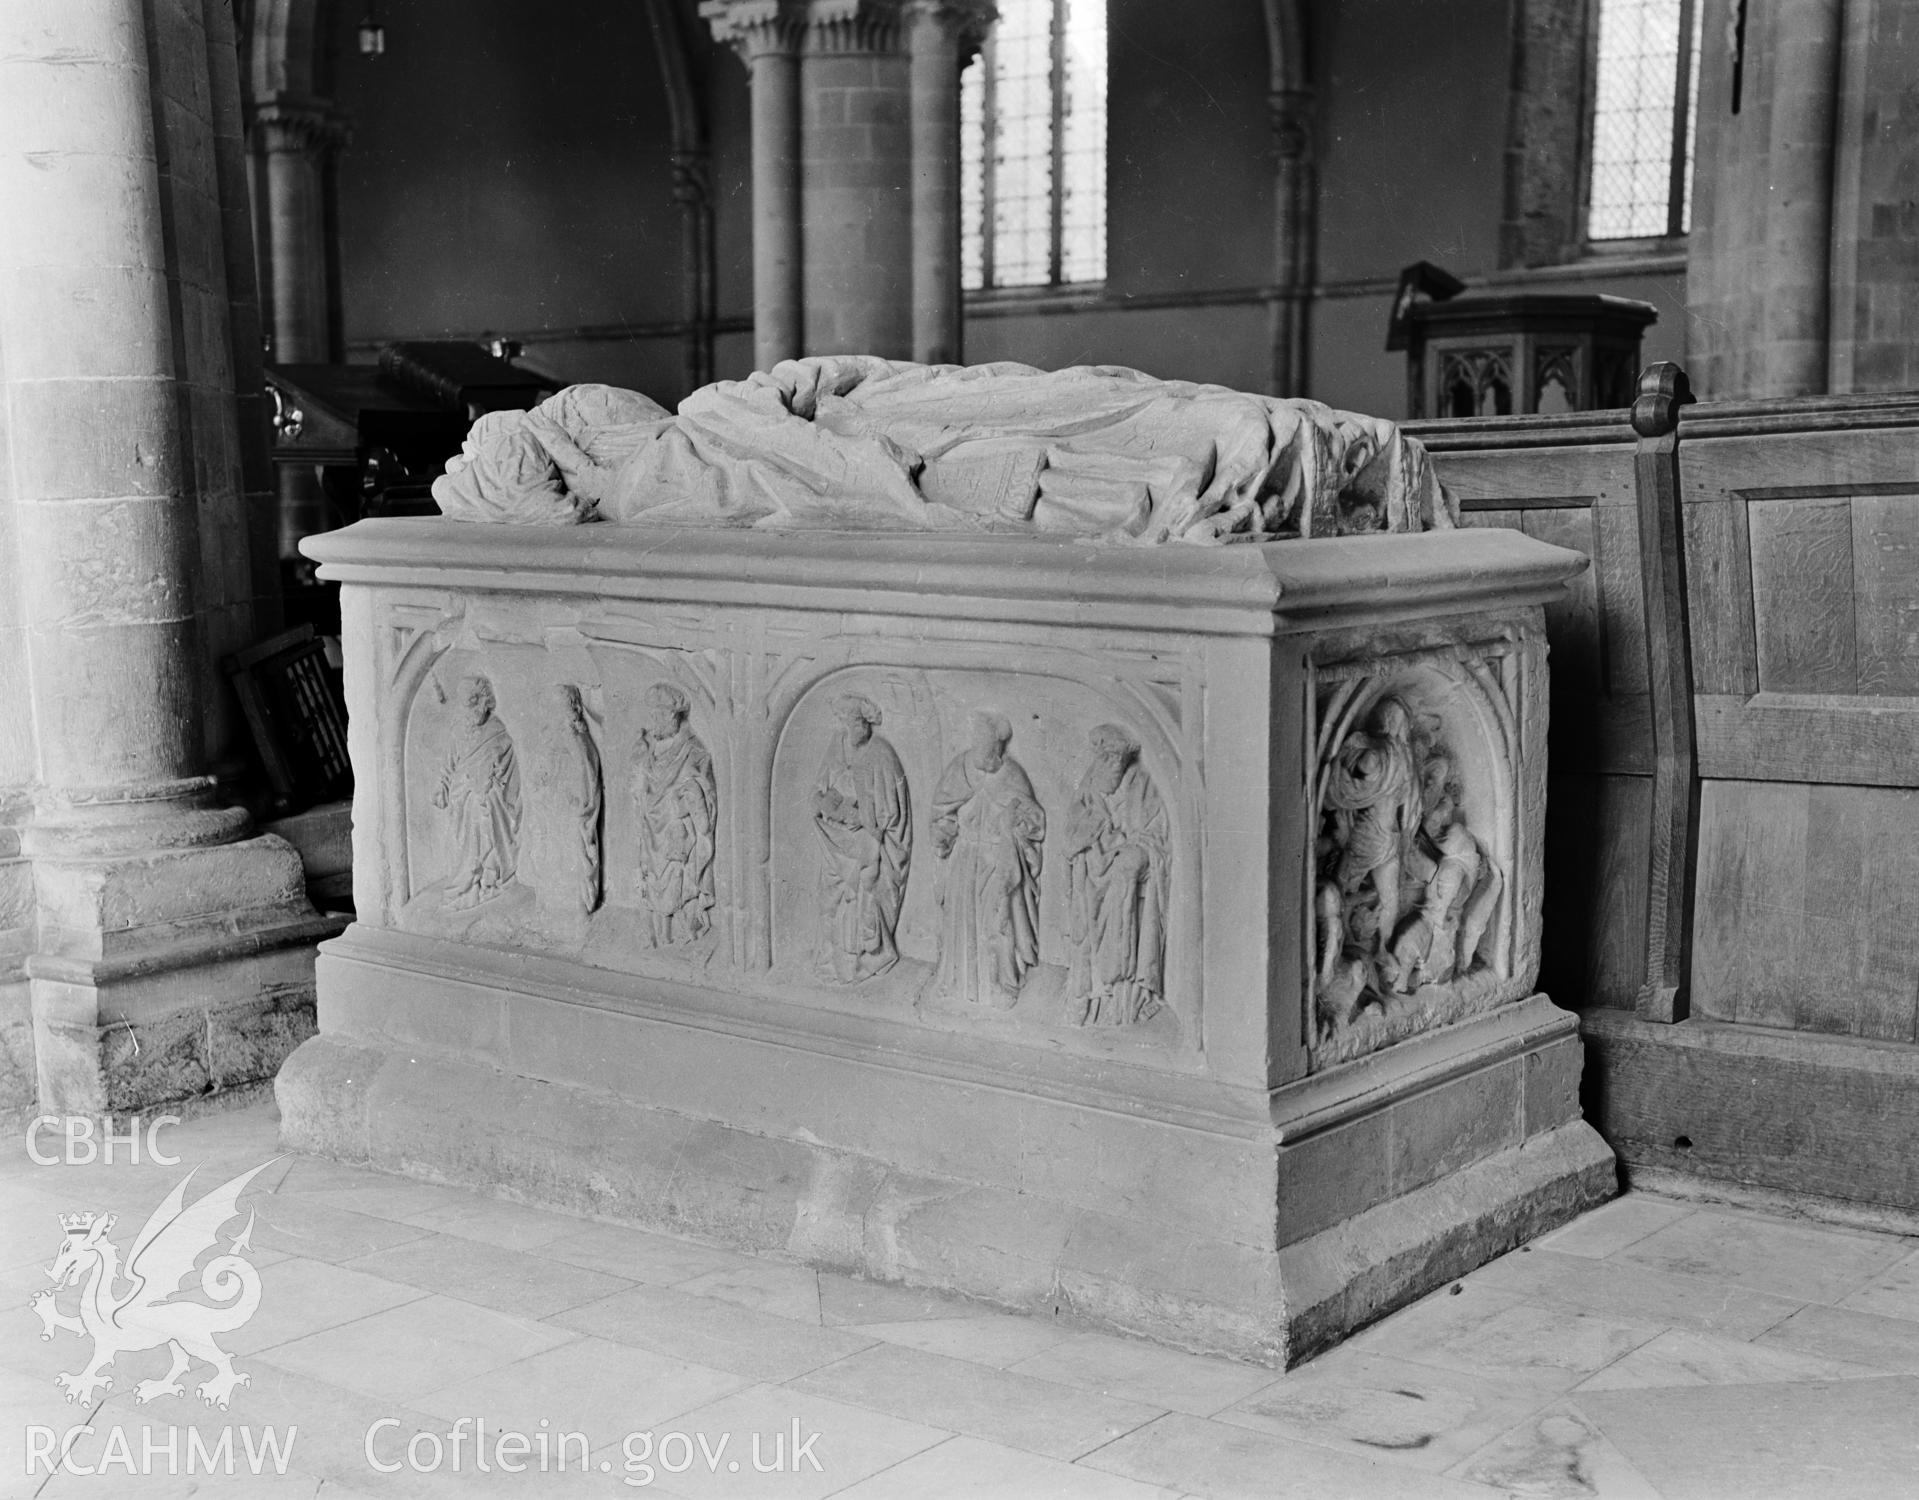 Interior view showing Bishop Morgan Tomb in the nave.